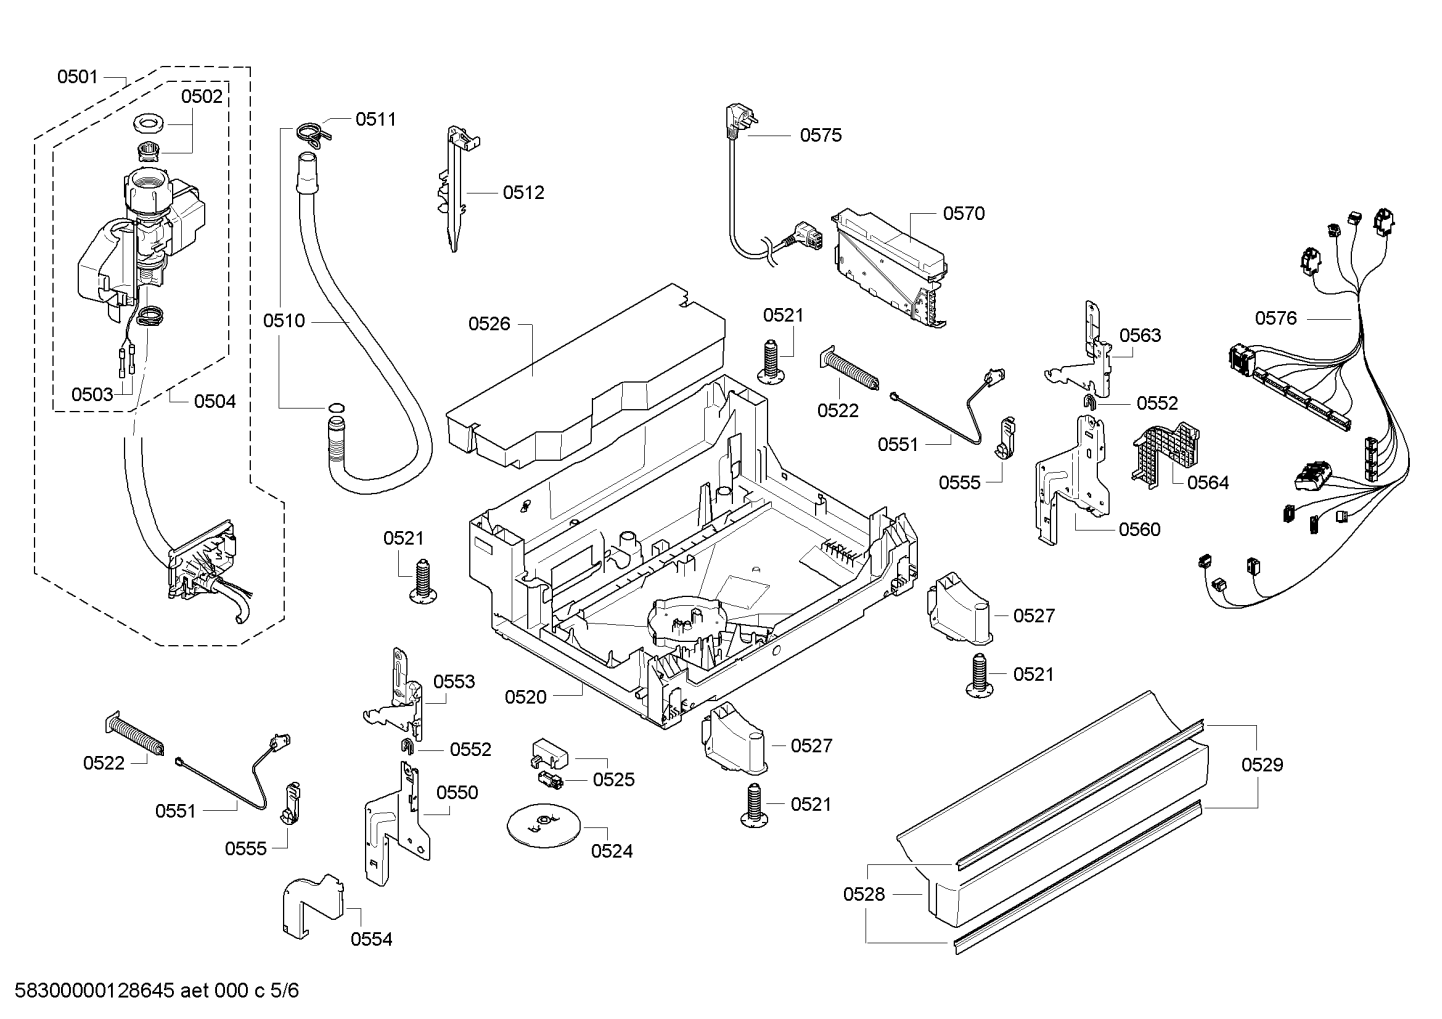 drawing_link_5_device_1658951